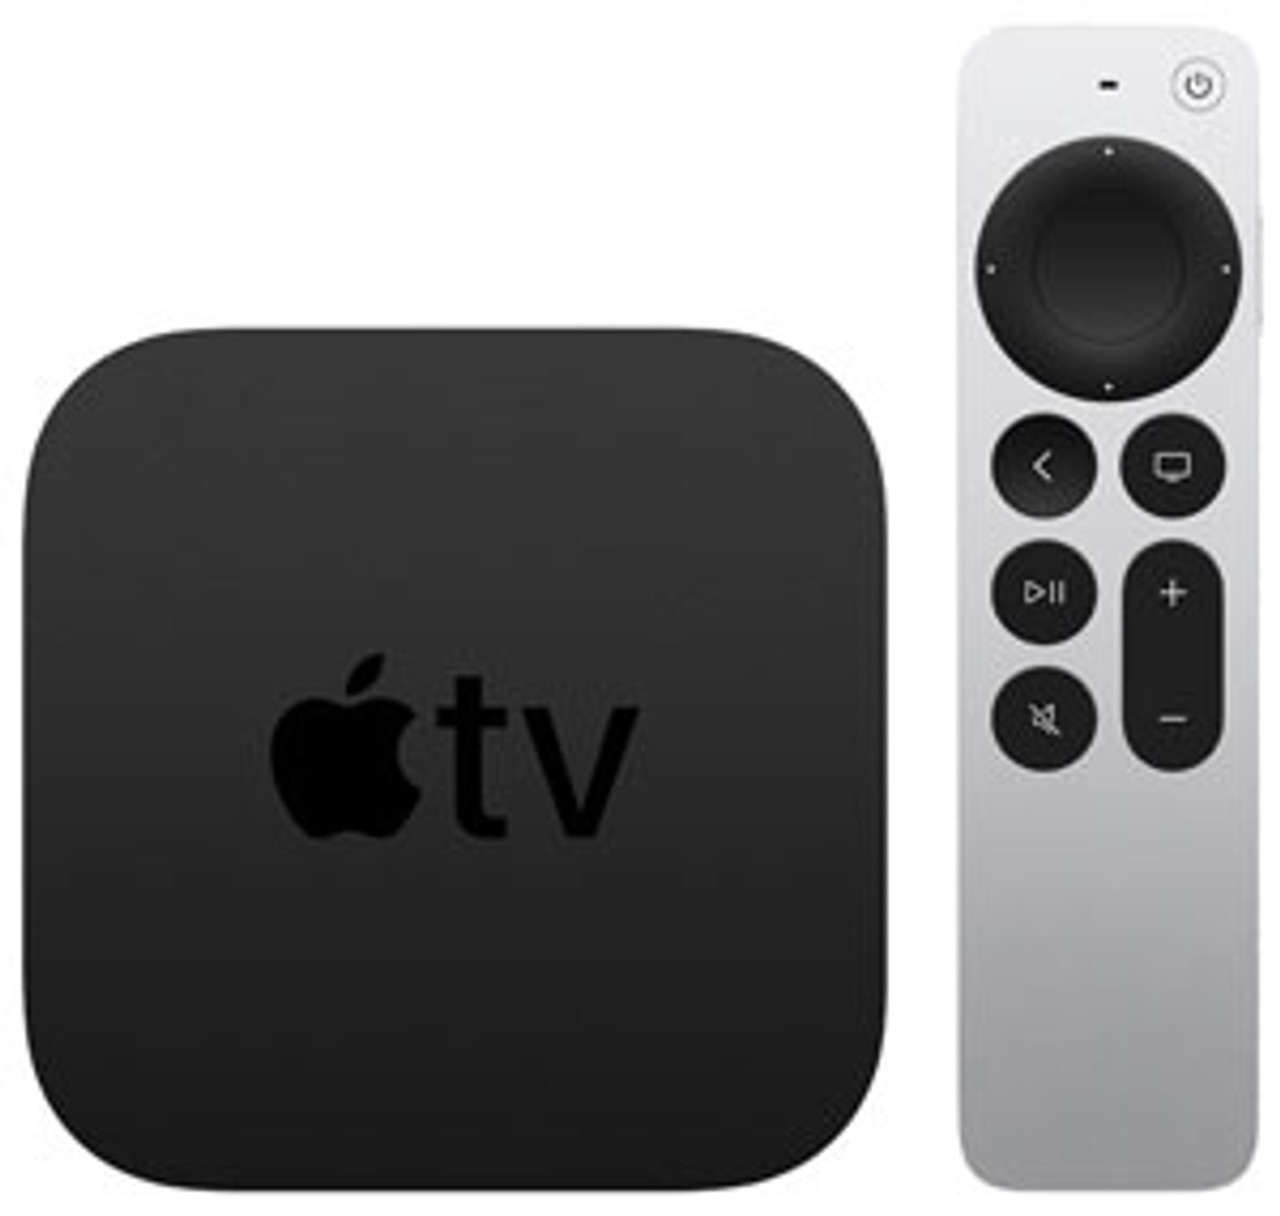 Aktuator Accepteret Spytte Apple TV 4K 32GB (2nd Generation) MXGY2LL/A | mac of all trades